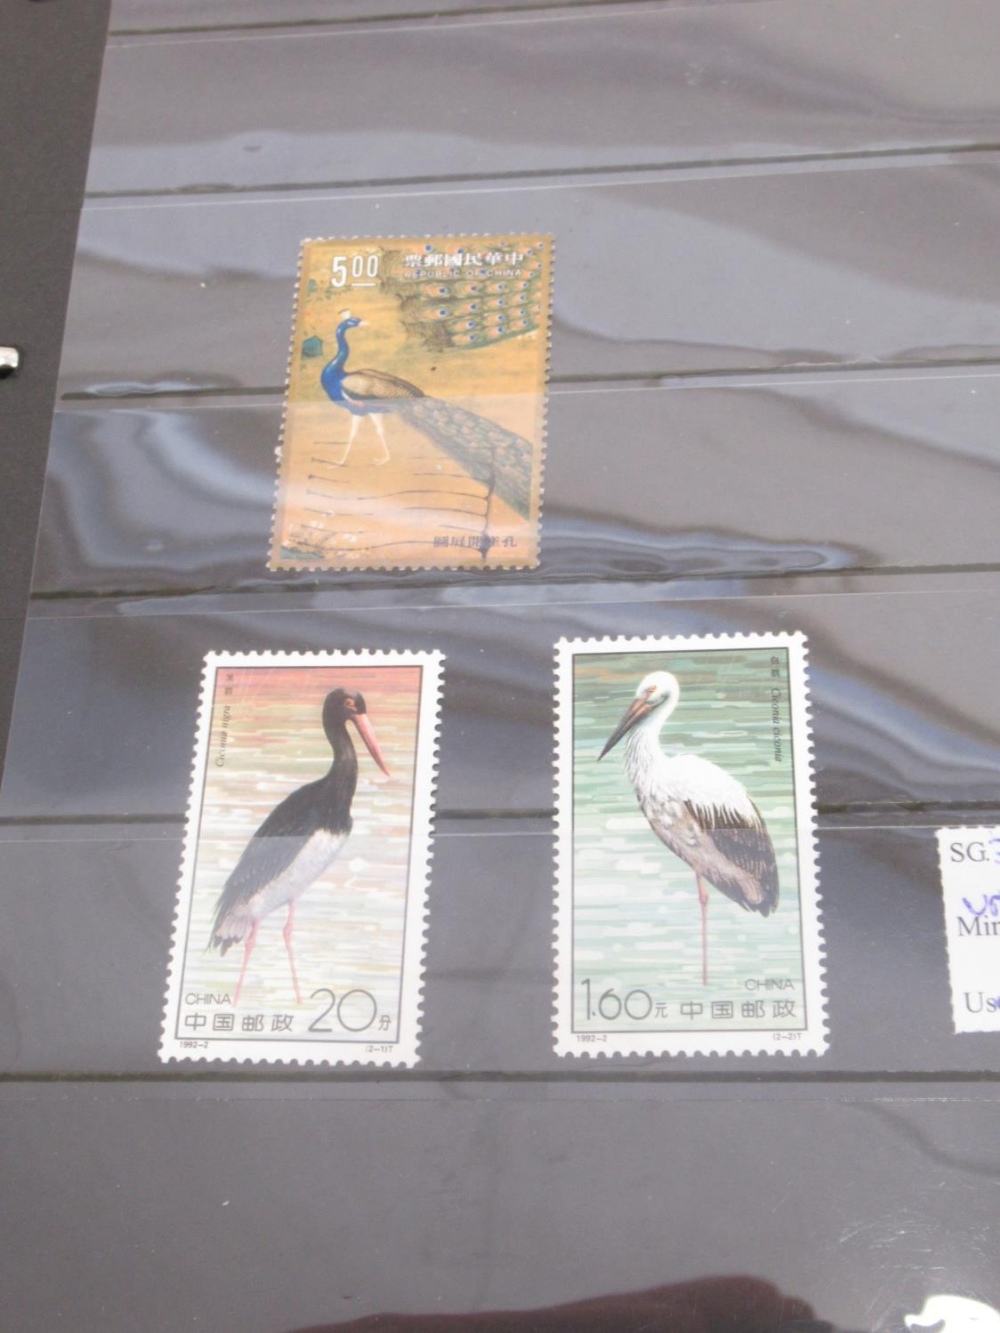 2 stamp folders cont. mixed international stamps relating to birds, a stamp album cont. mixed - Image 7 of 17